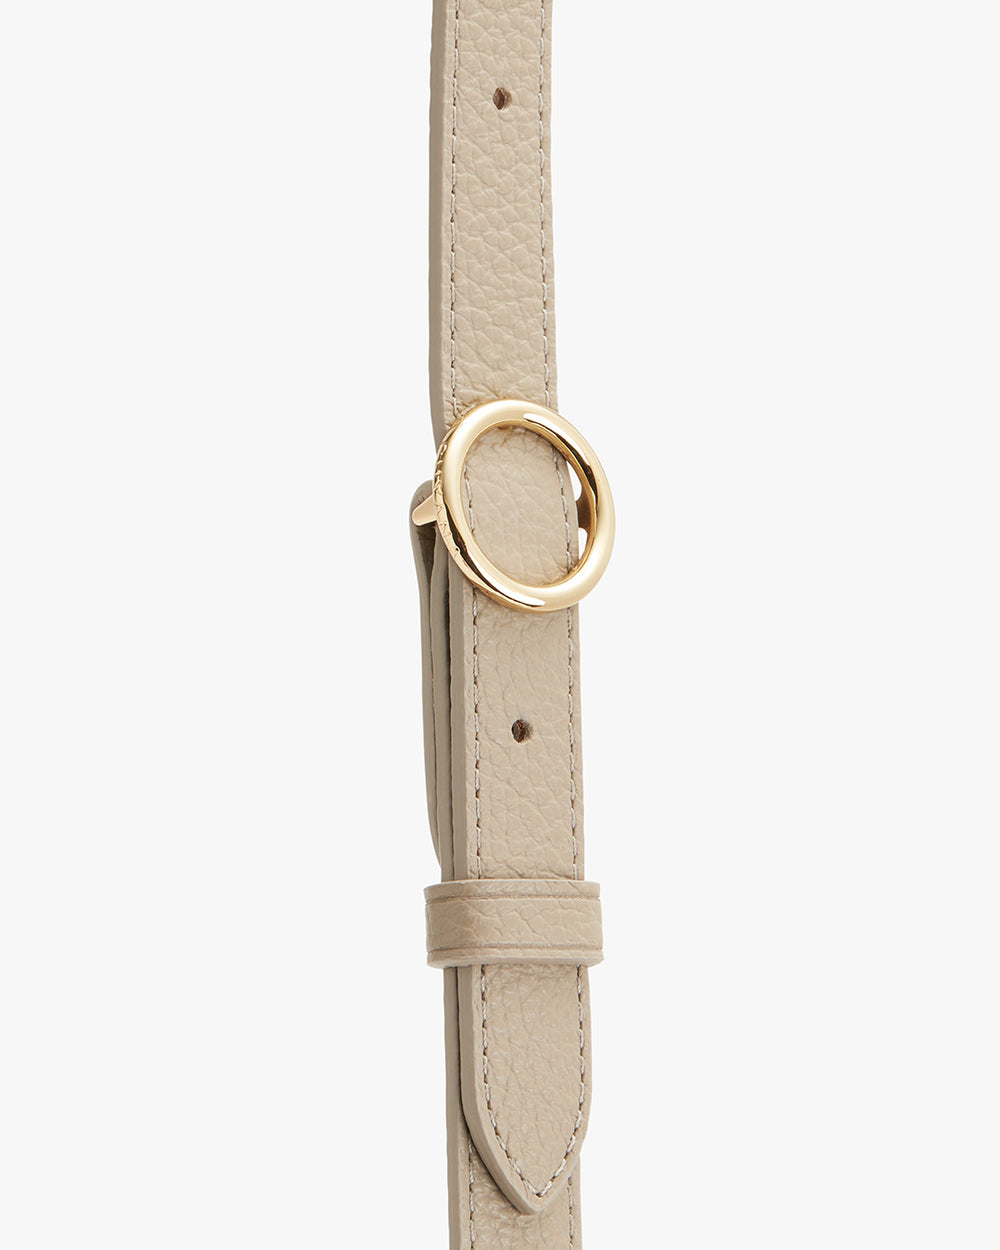 Belt with a circular buckle and stitched details.